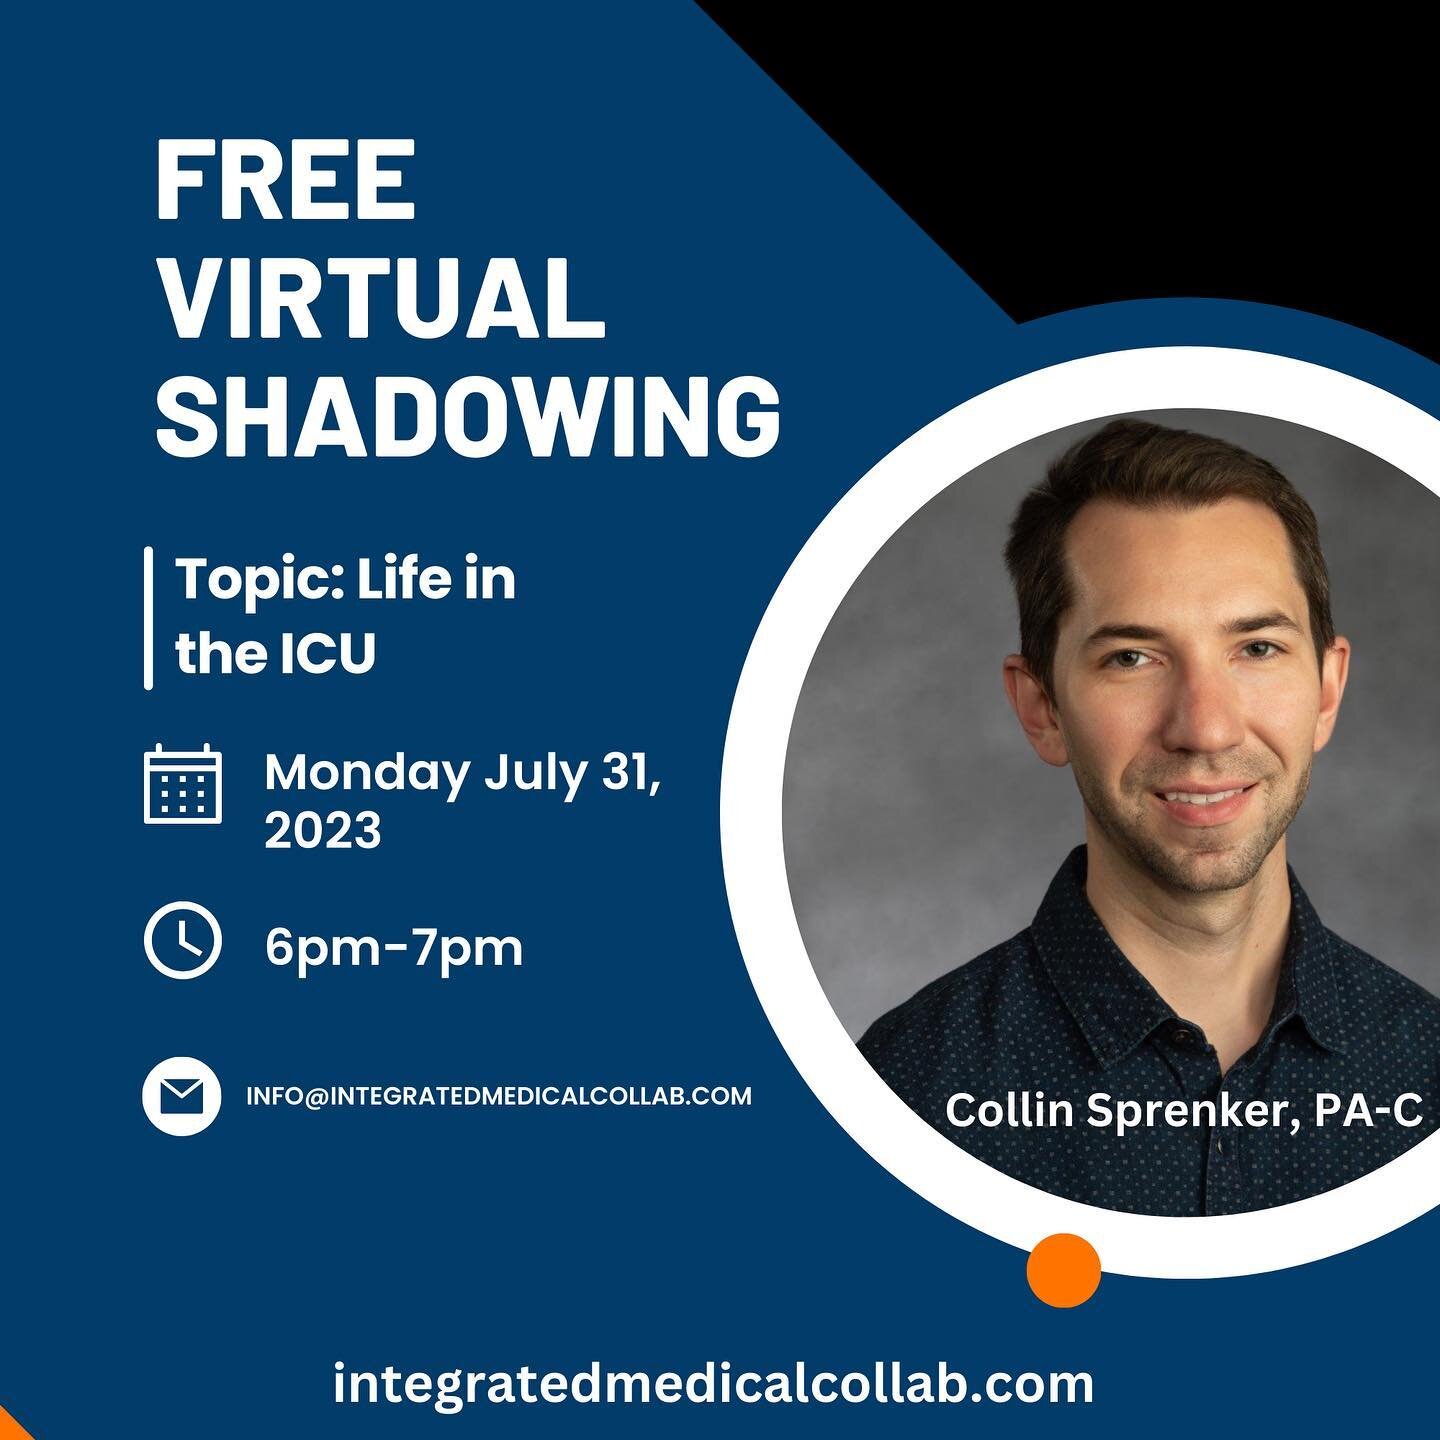 Join us for a free virtual shadowing  event! Our PA Collin will describe what a typical day in the life of an ICU provider is like utilizing case presentations and describing the role of the multidisciplinary team! This is a great opportunity to get 